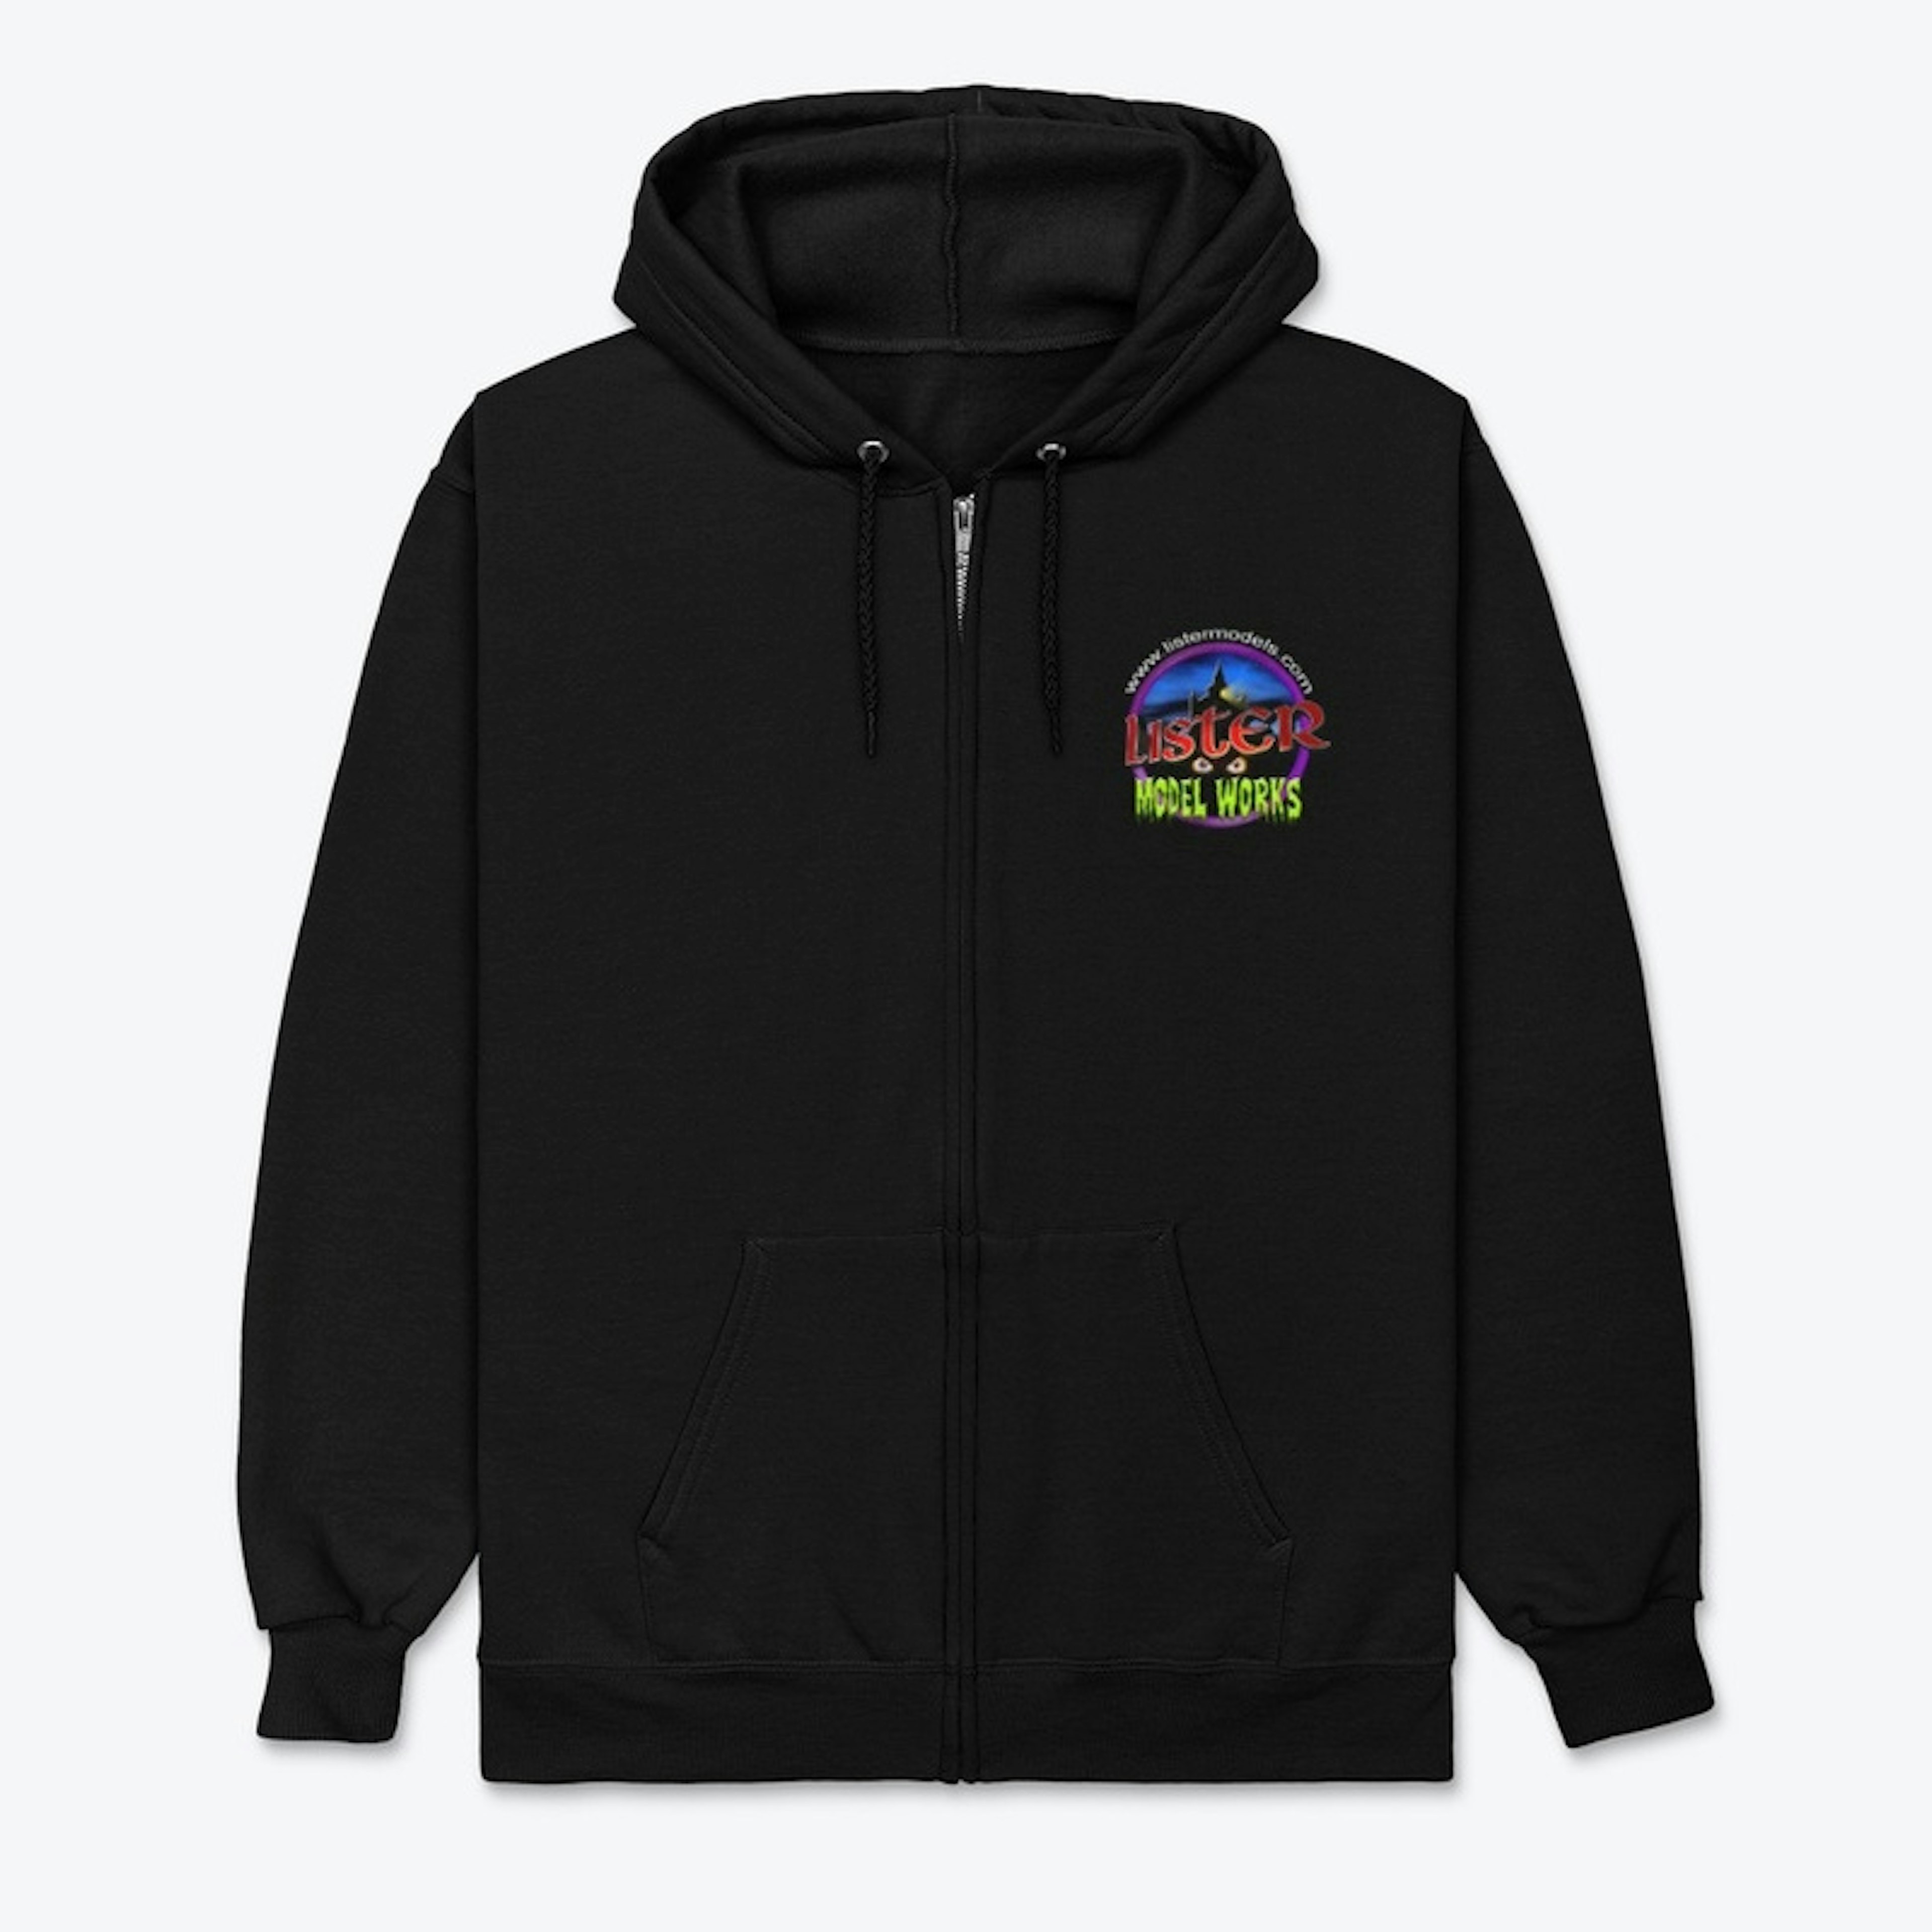 Alternate Hoodie with logo on the back